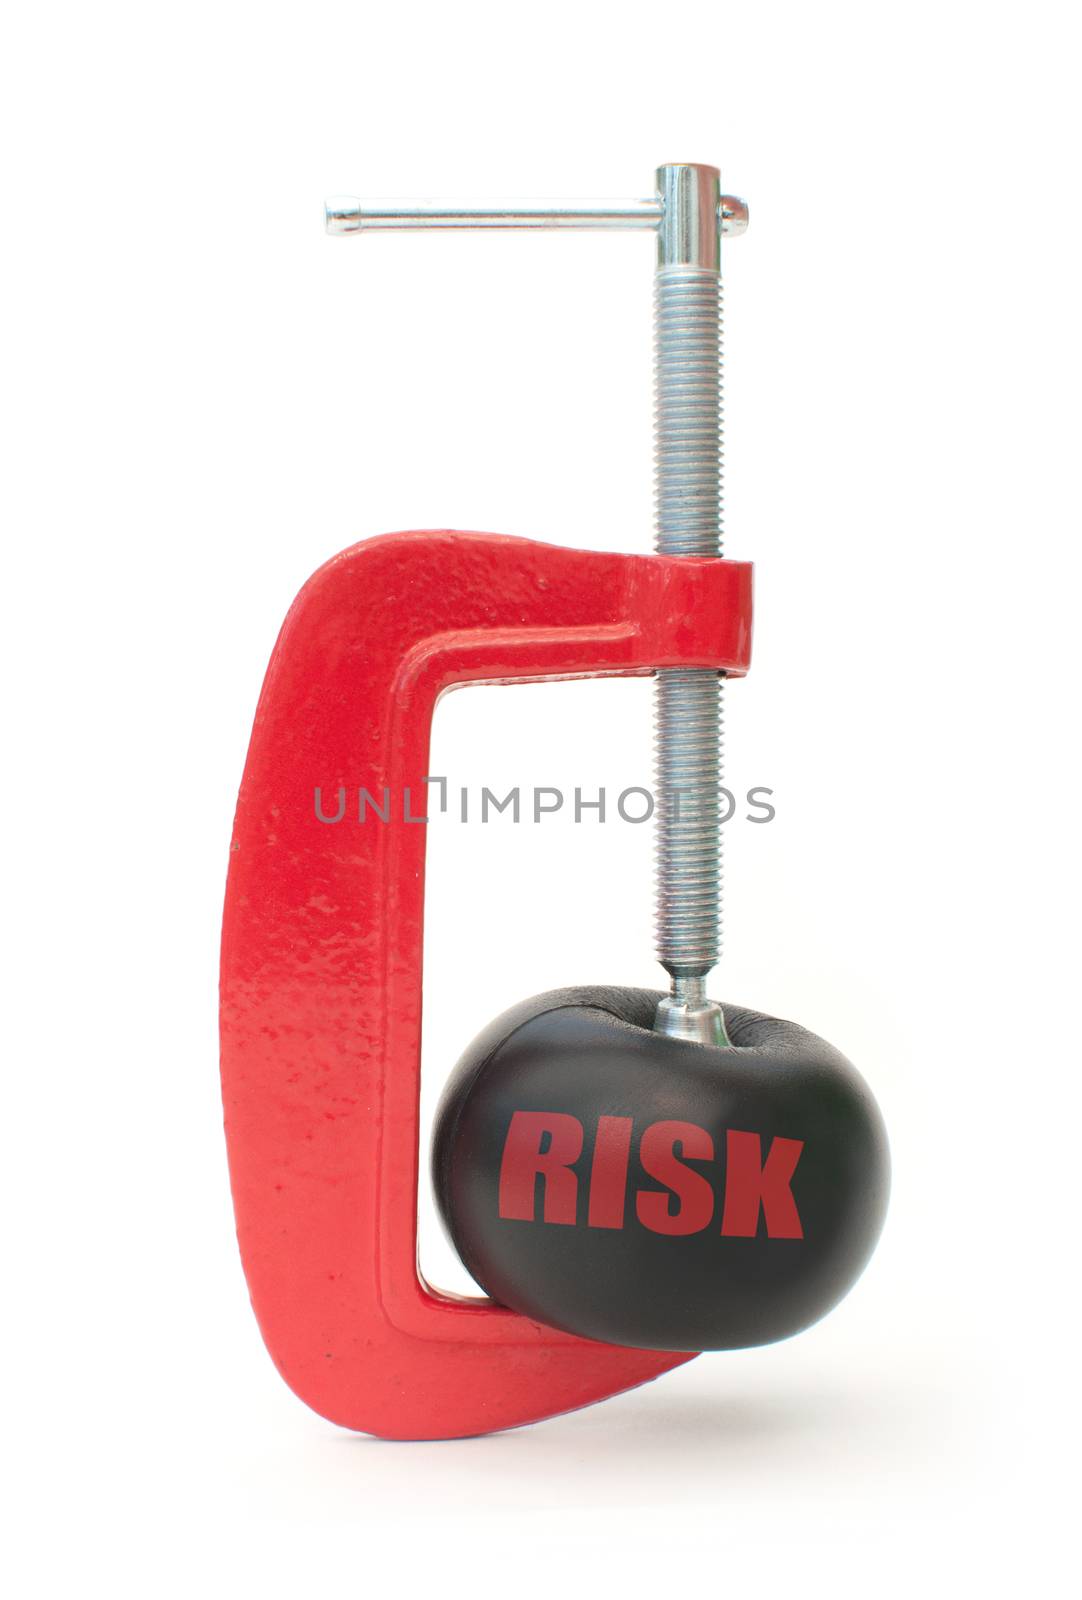 Clamp squeezing a ball labeled with risk 